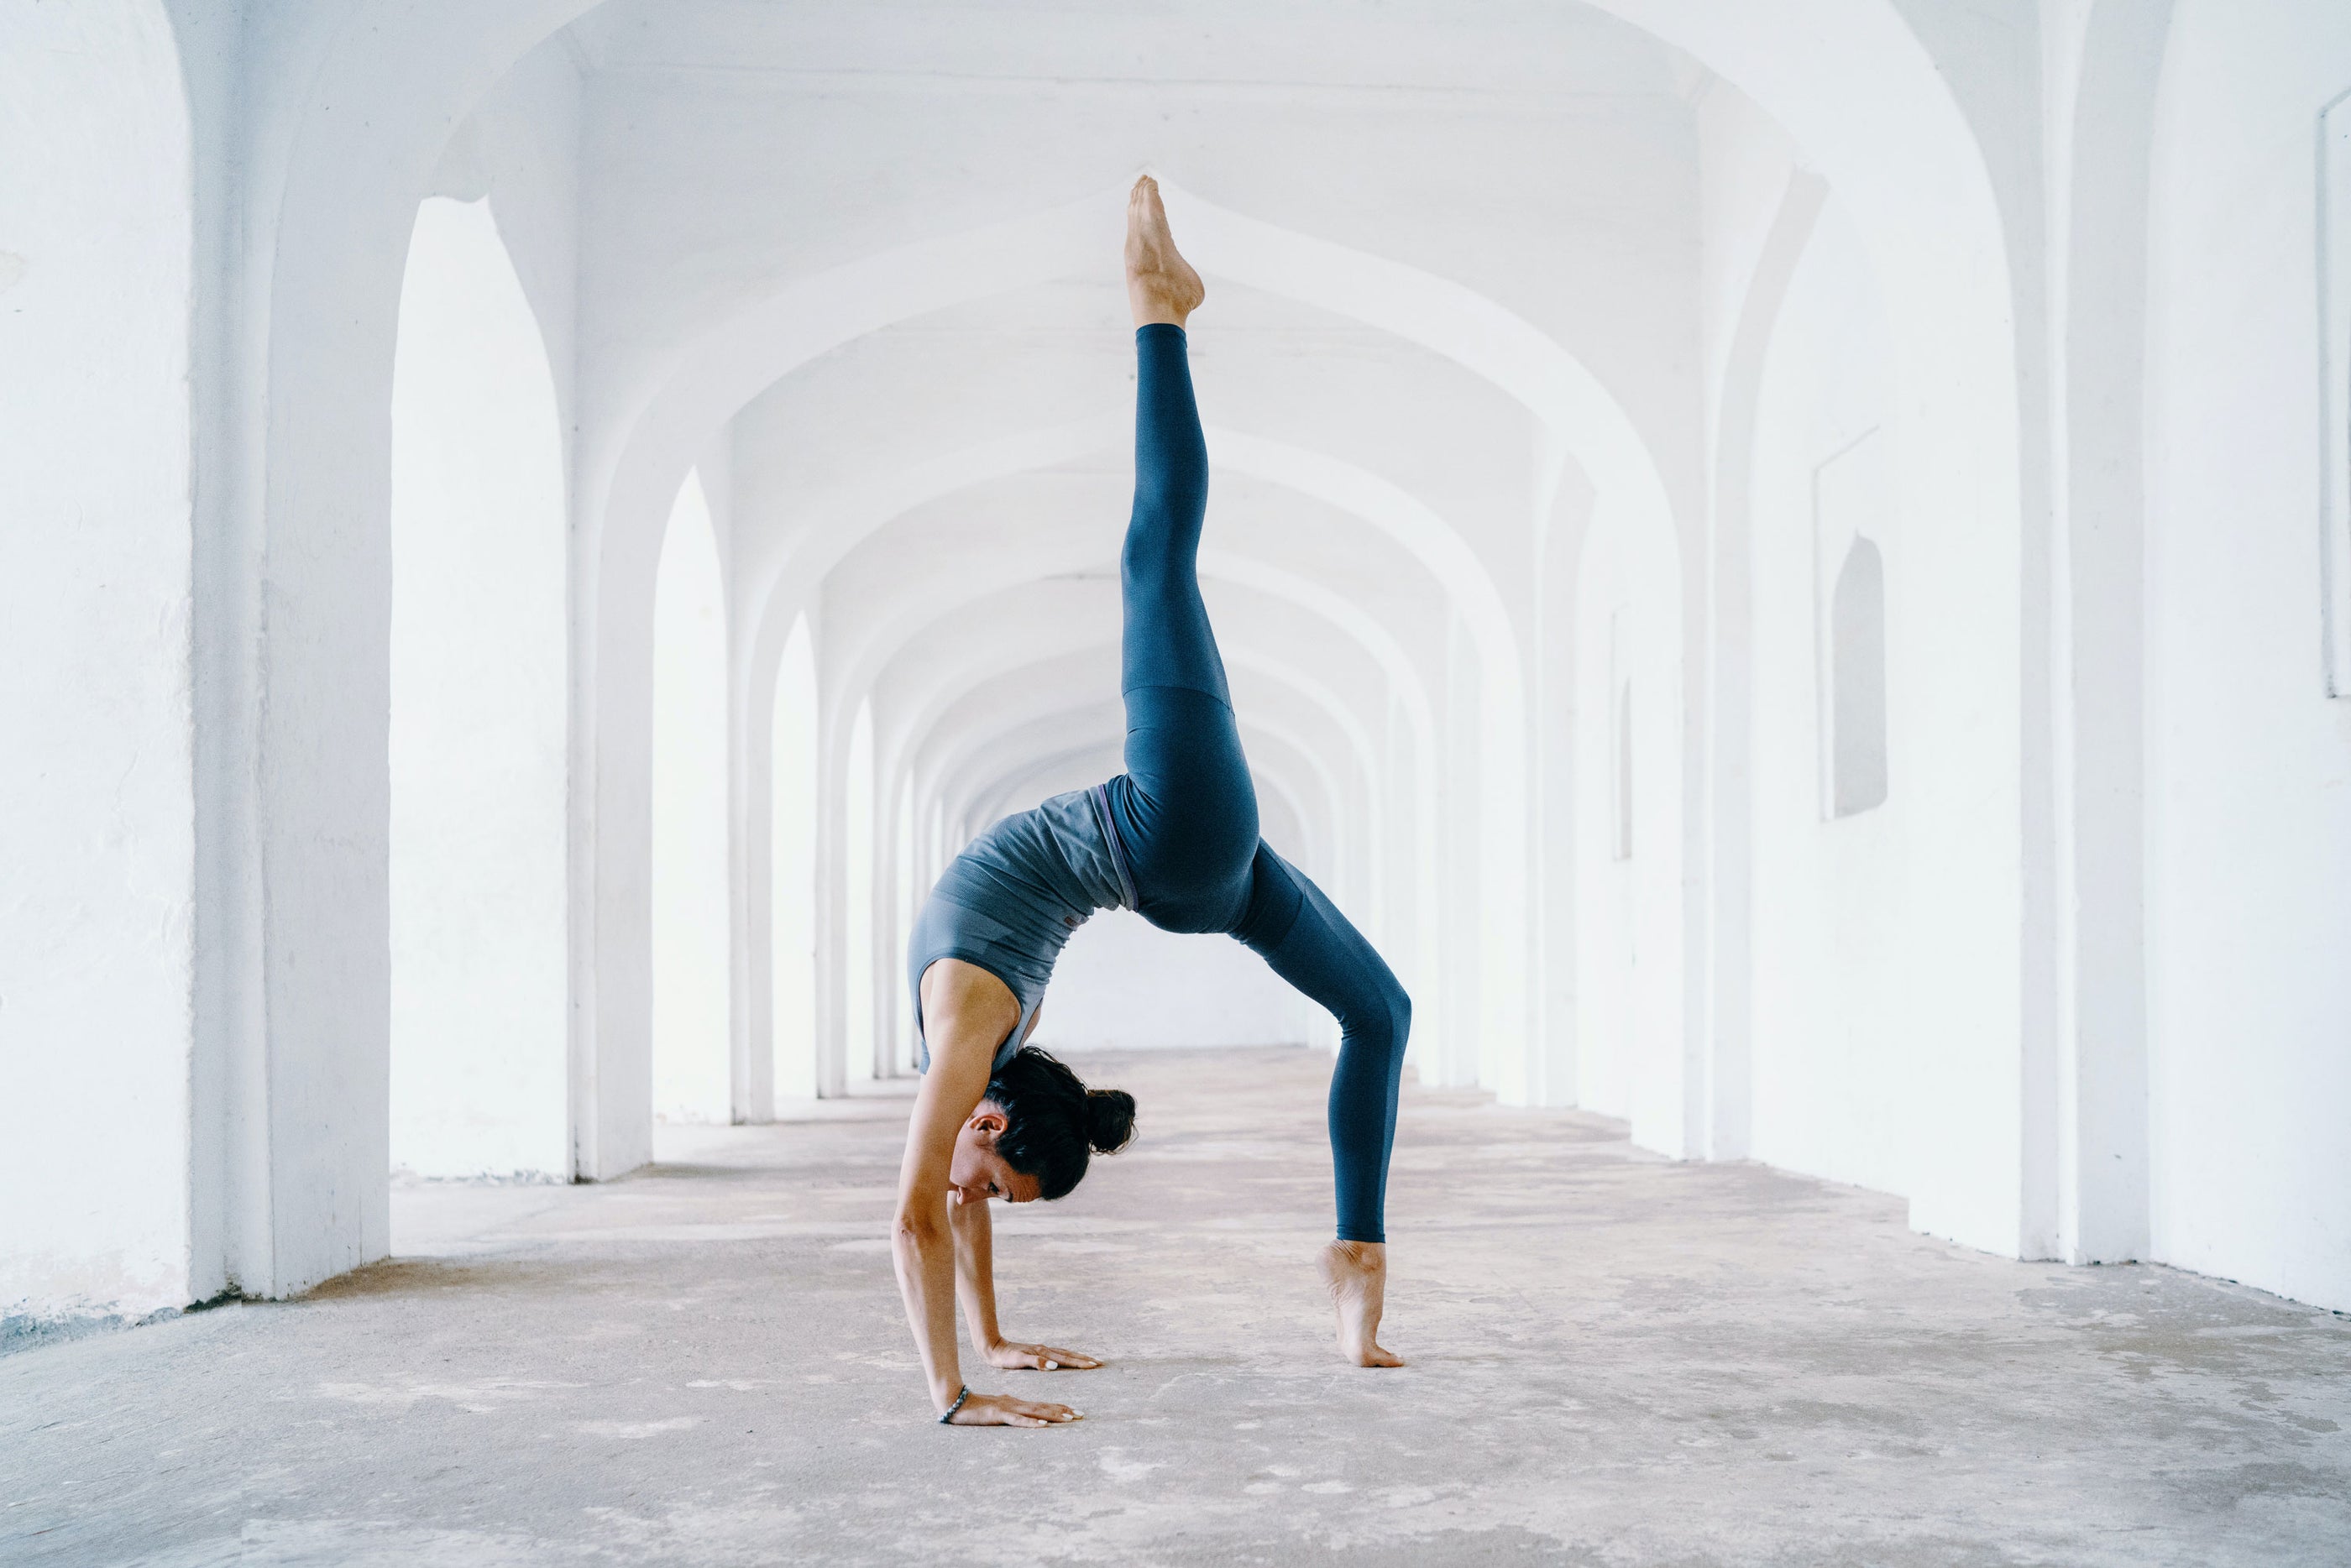 Women doing yoga pose in a long tunnel of white archways